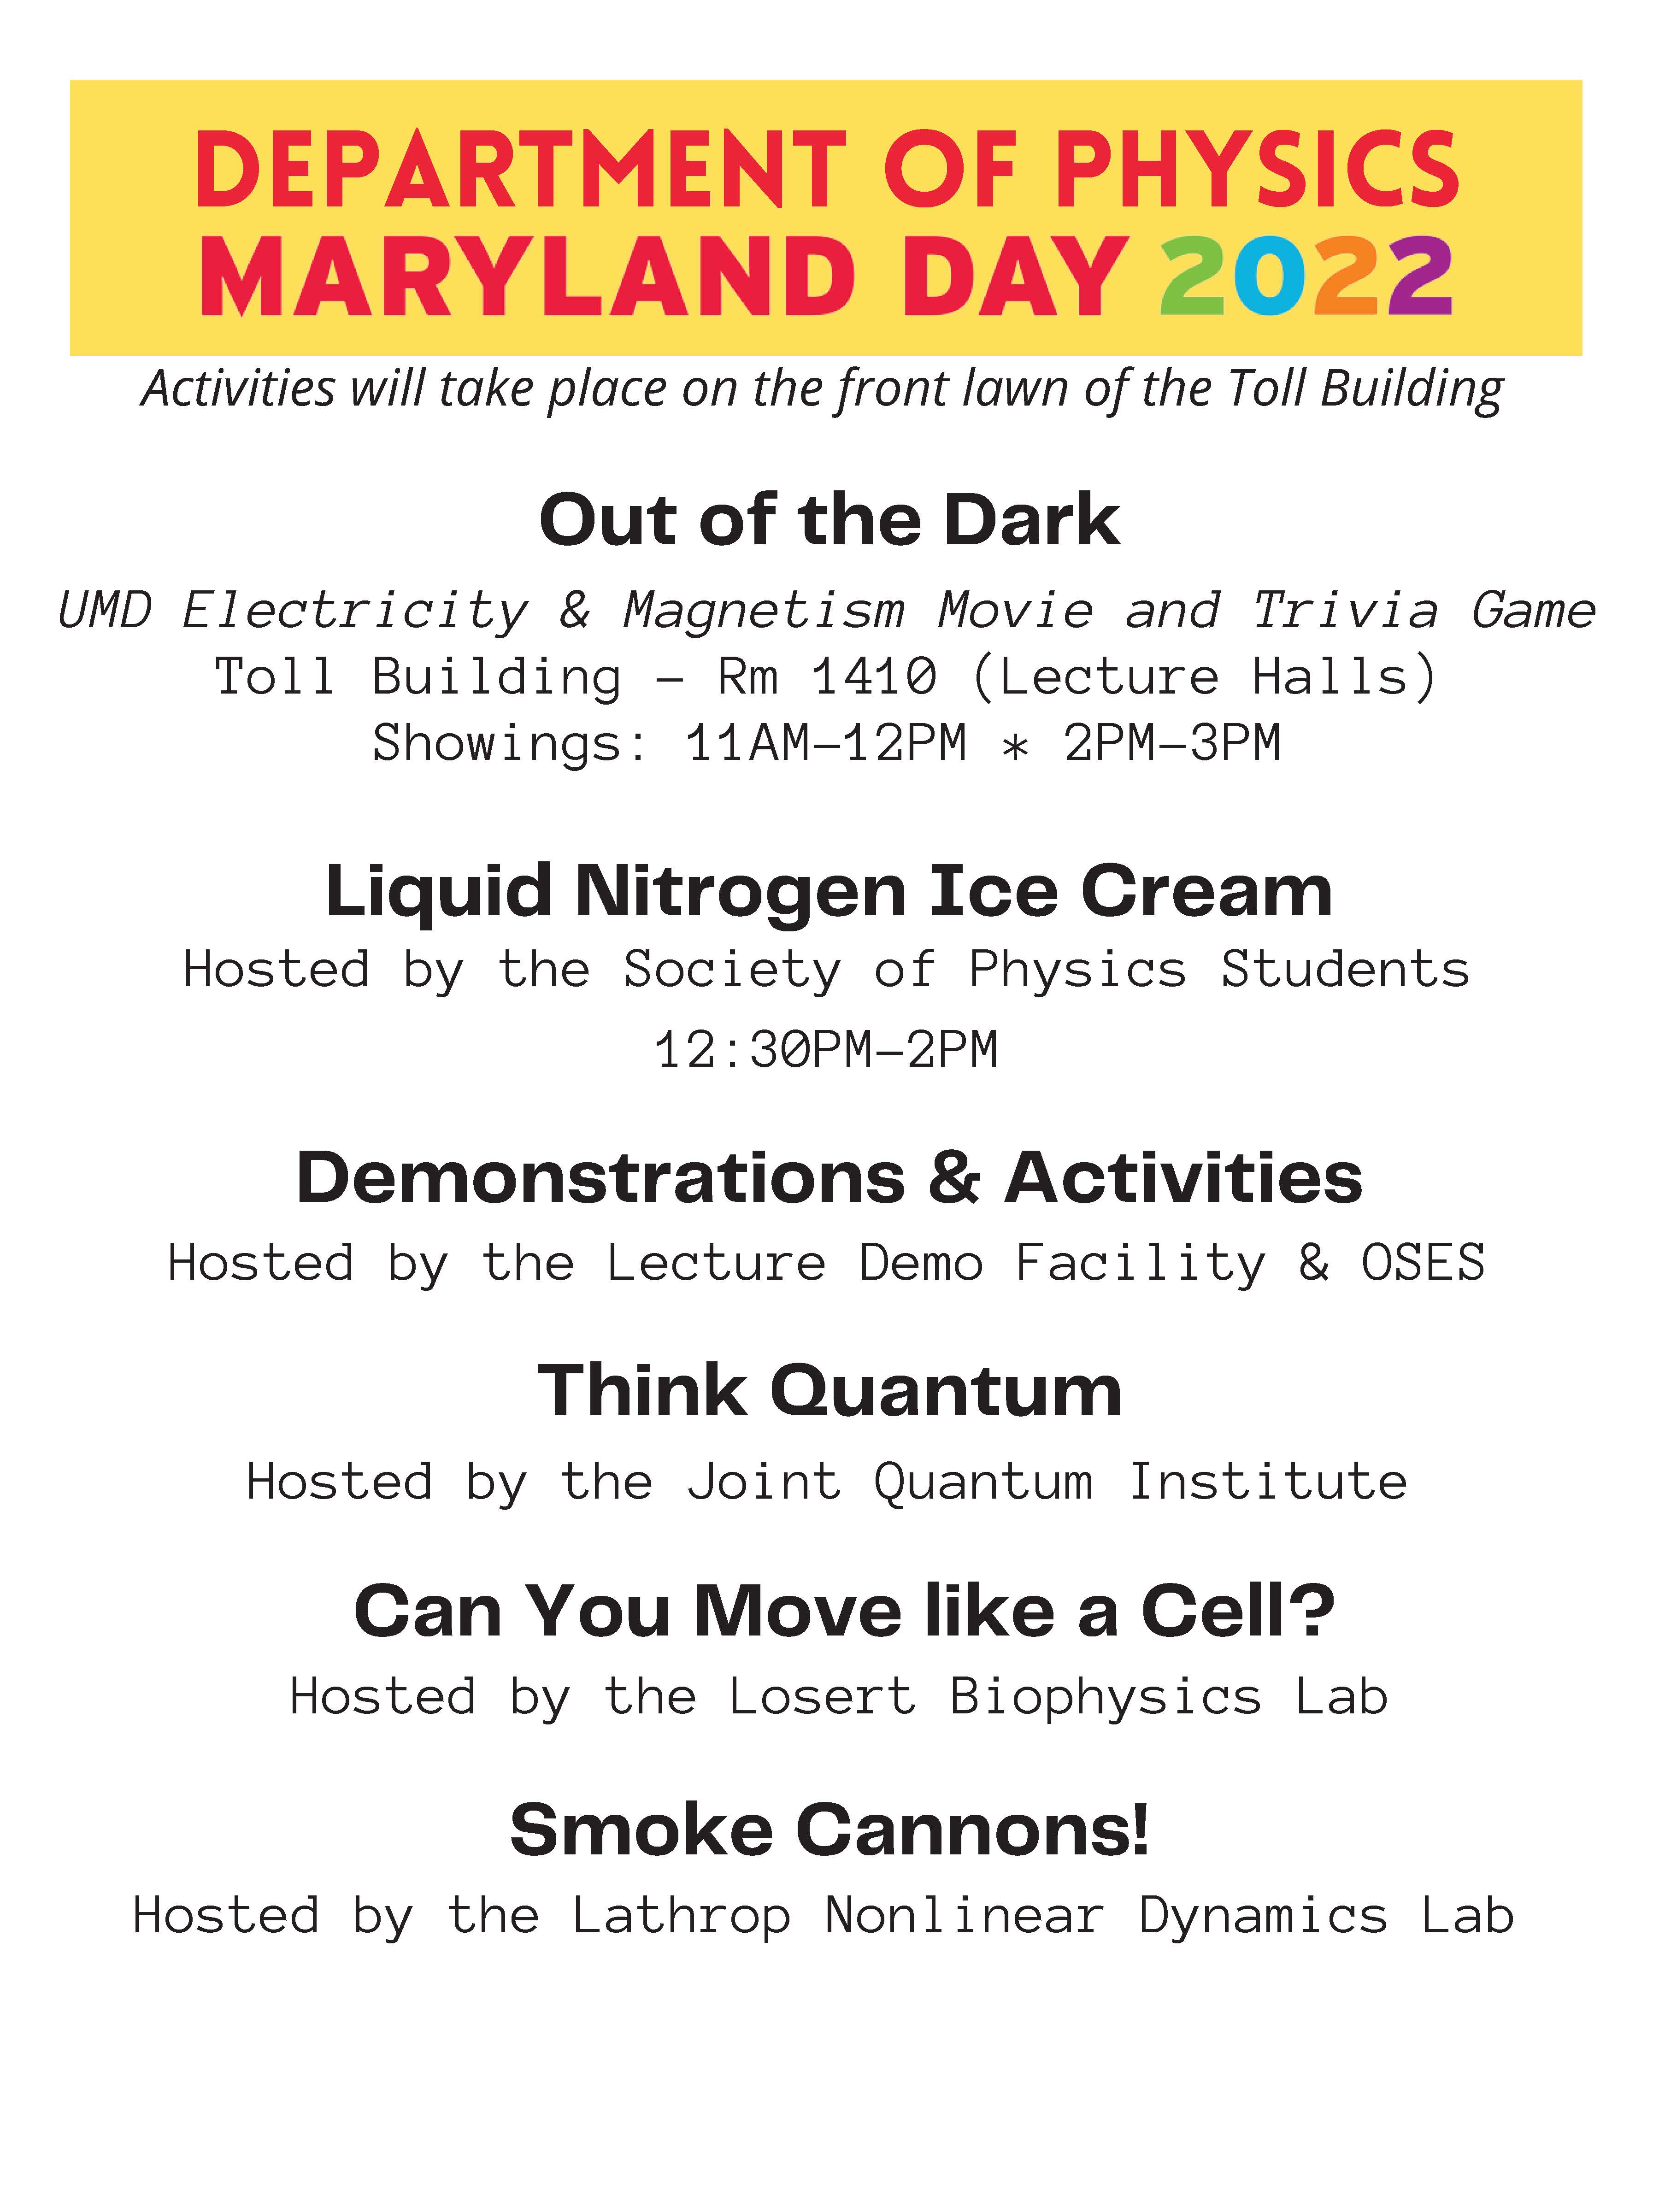 Maryland Day Flyer 2022